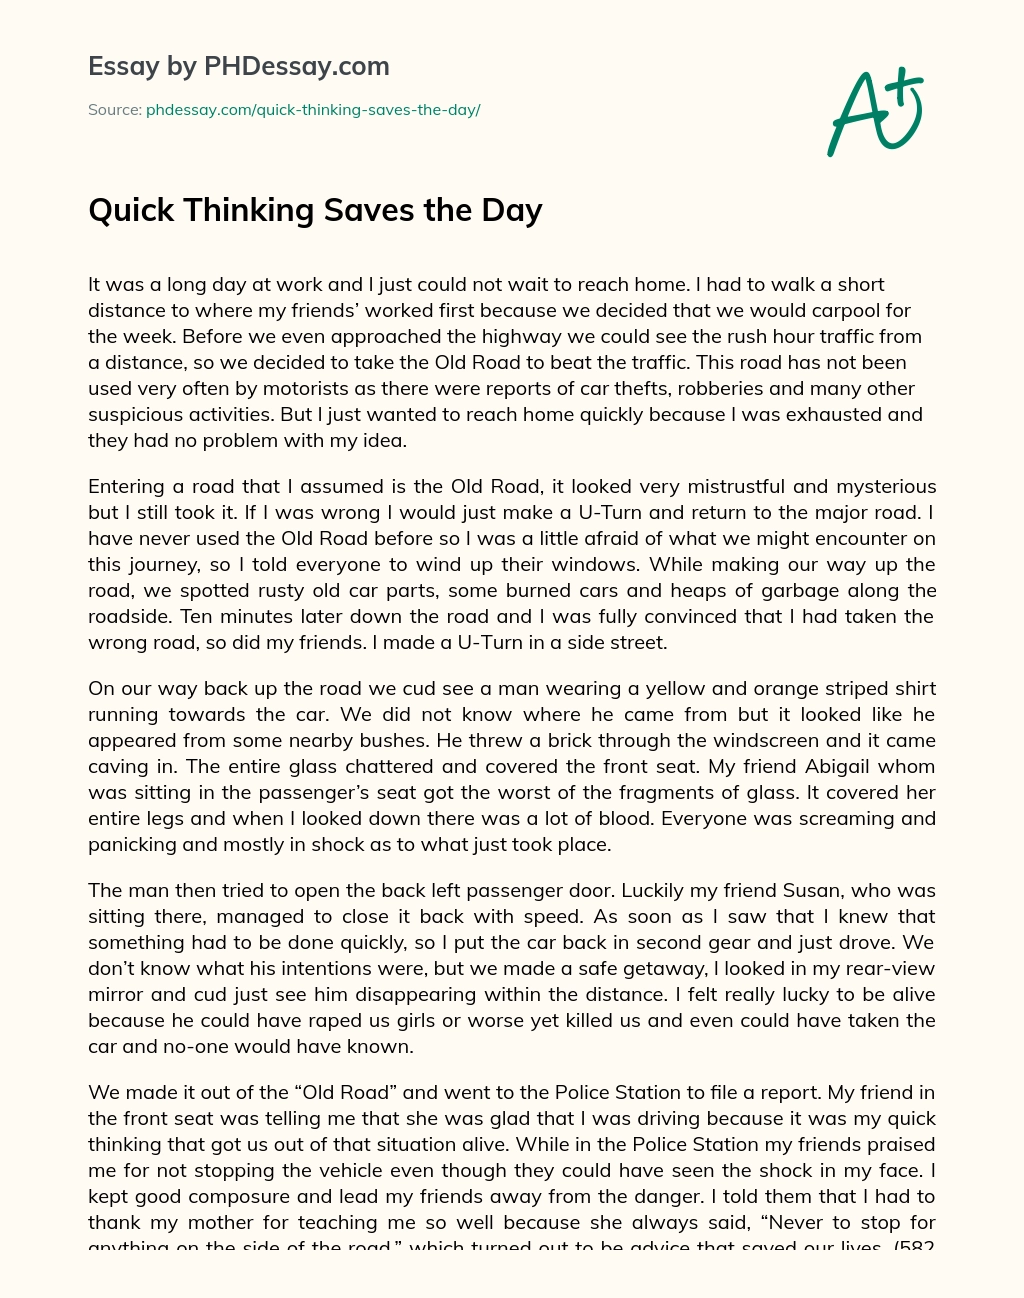 Quick Thinking Saves the Day essay